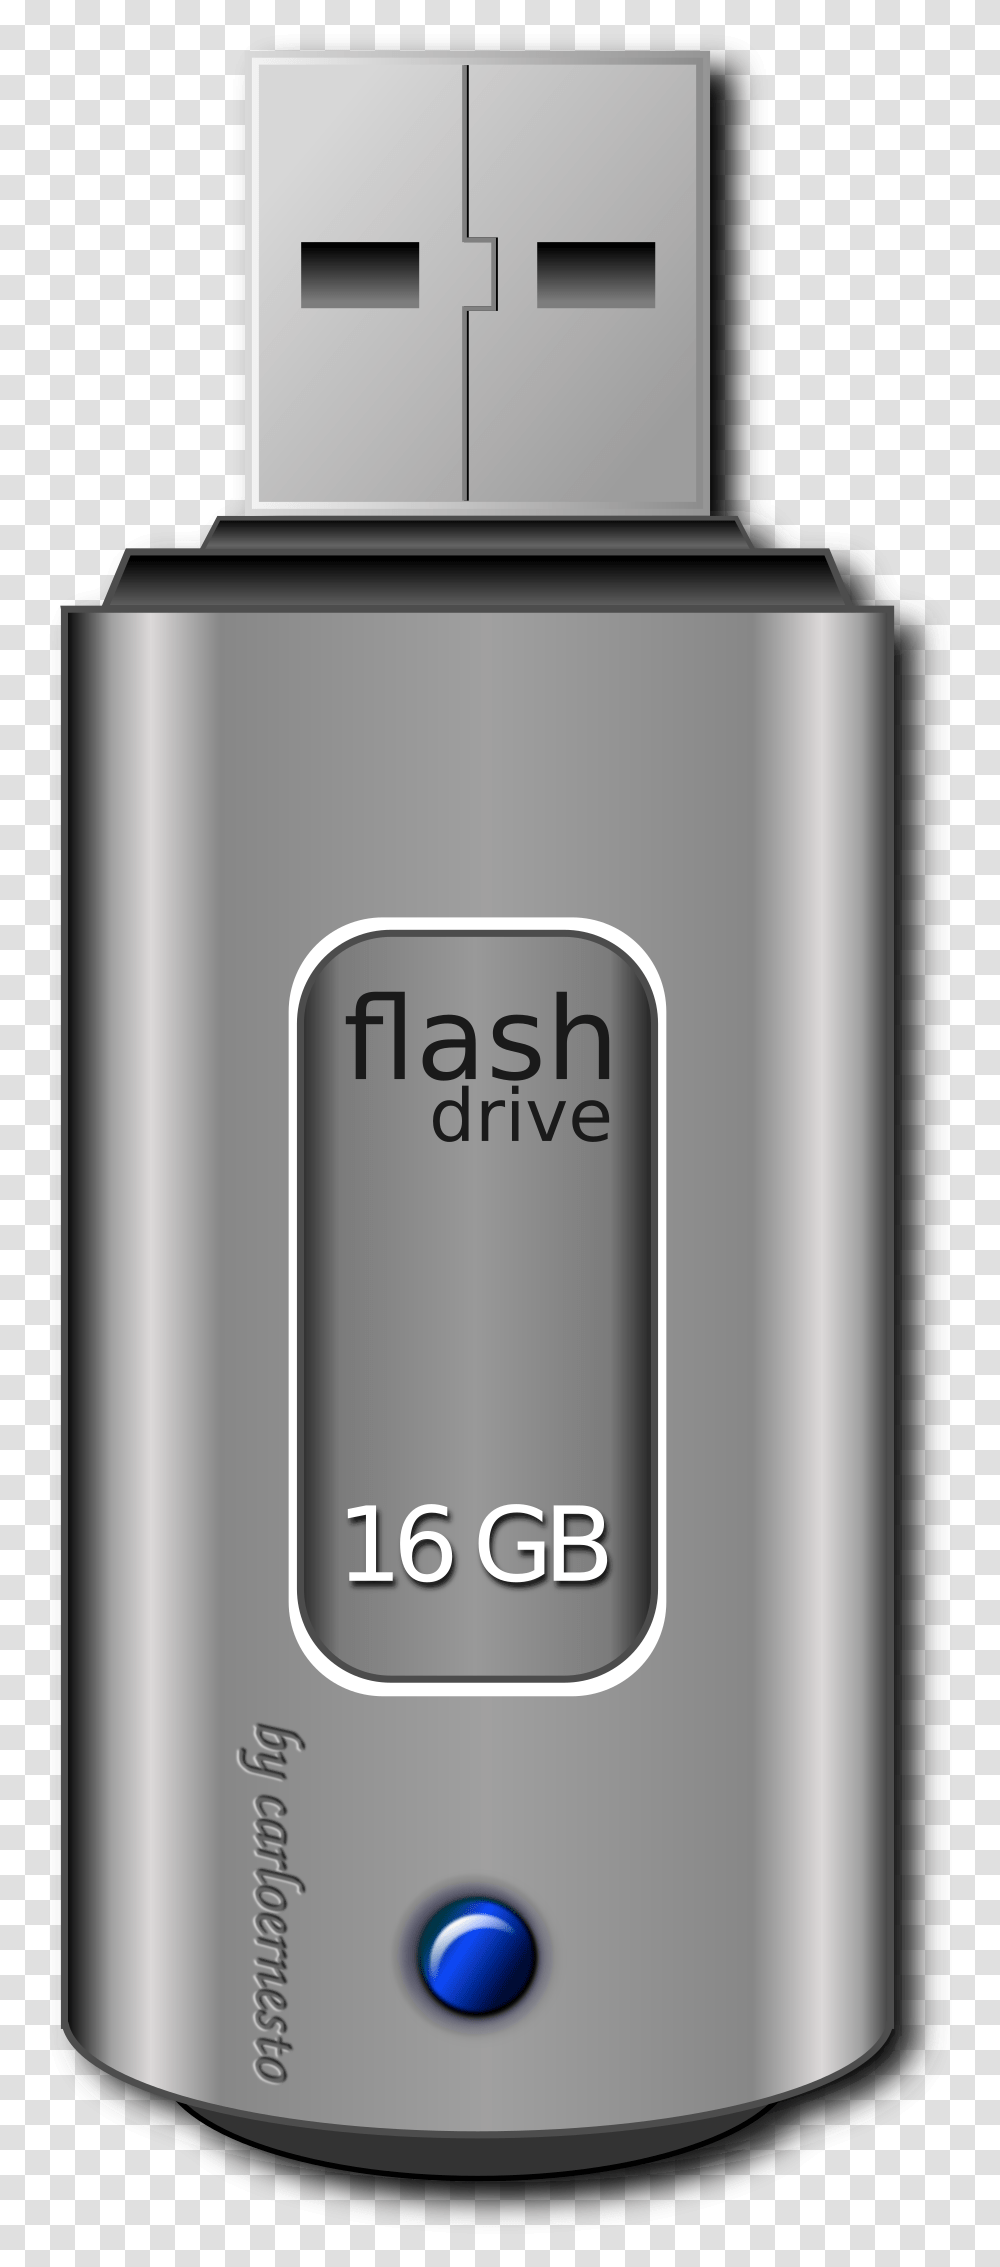 Free To Use Ampamp Public Domain Flash Drive Clip Art Icon Flash Drive Usb, Tin, Can, Aluminium, Spray Can Transparent Png